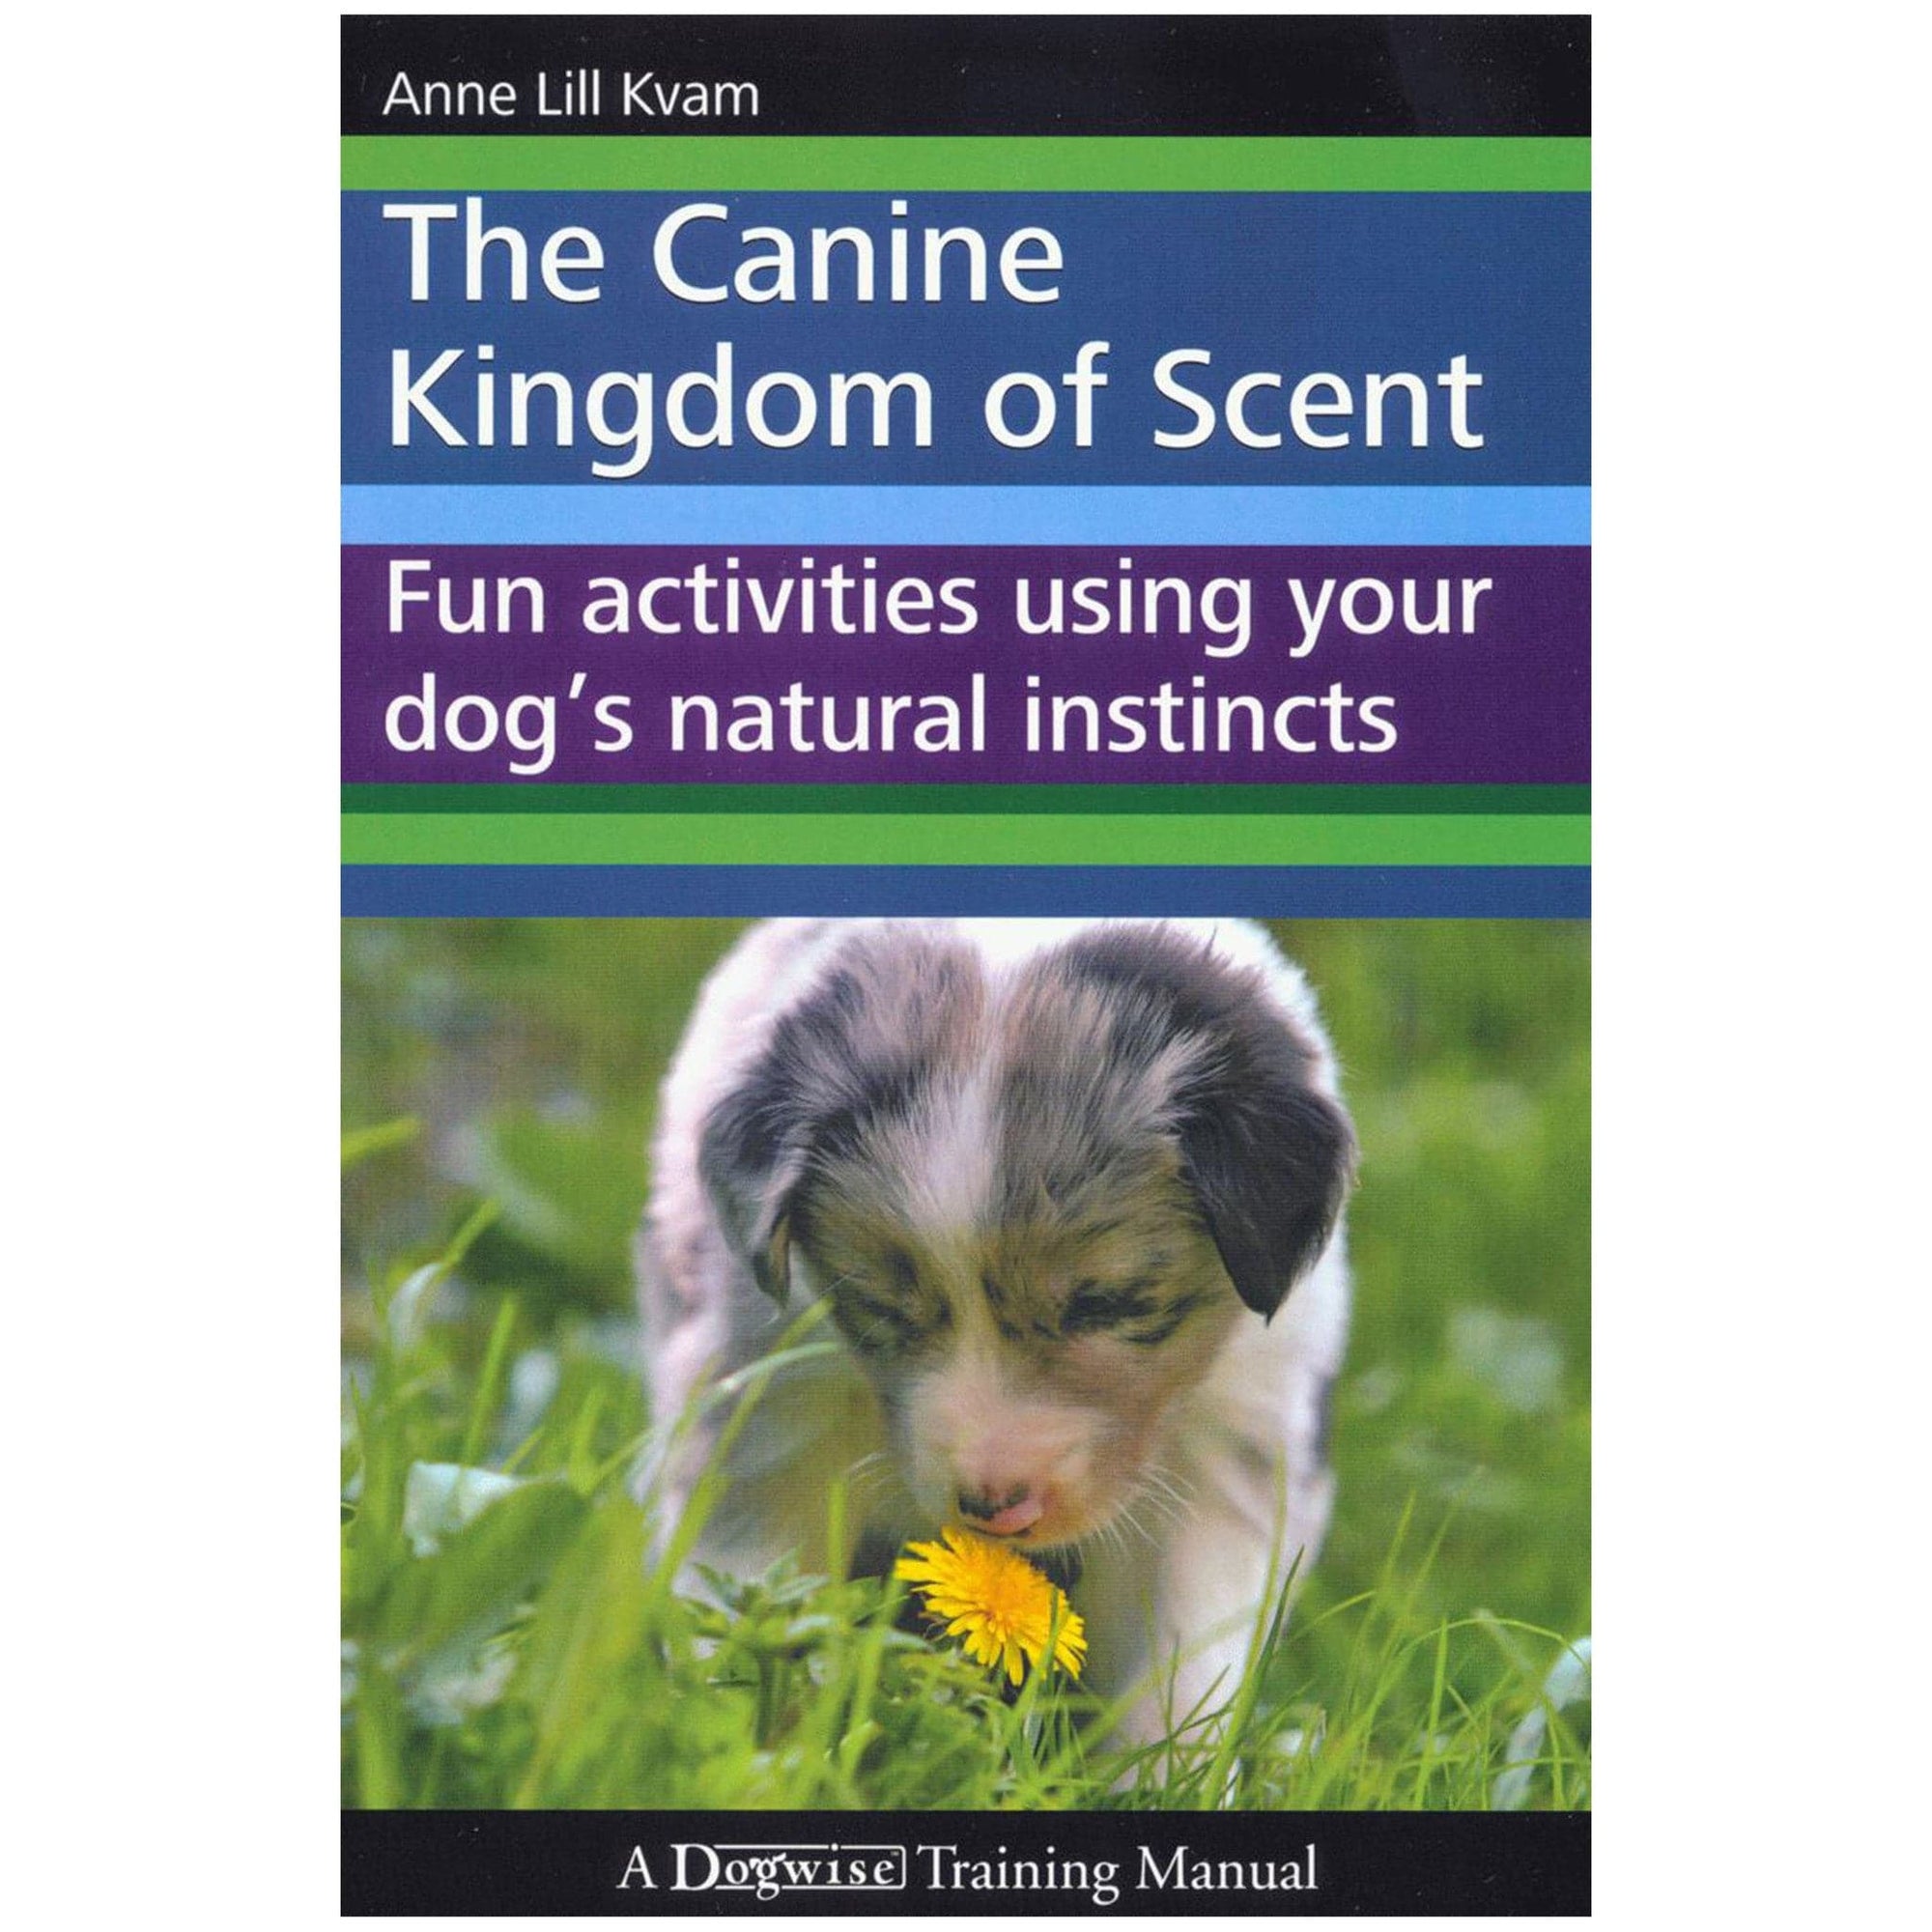 E-BOOK The Canine Kingdom of Scent: Fun Activities Using Your Dog’s Natural Instincts by Anne Lill Kvam